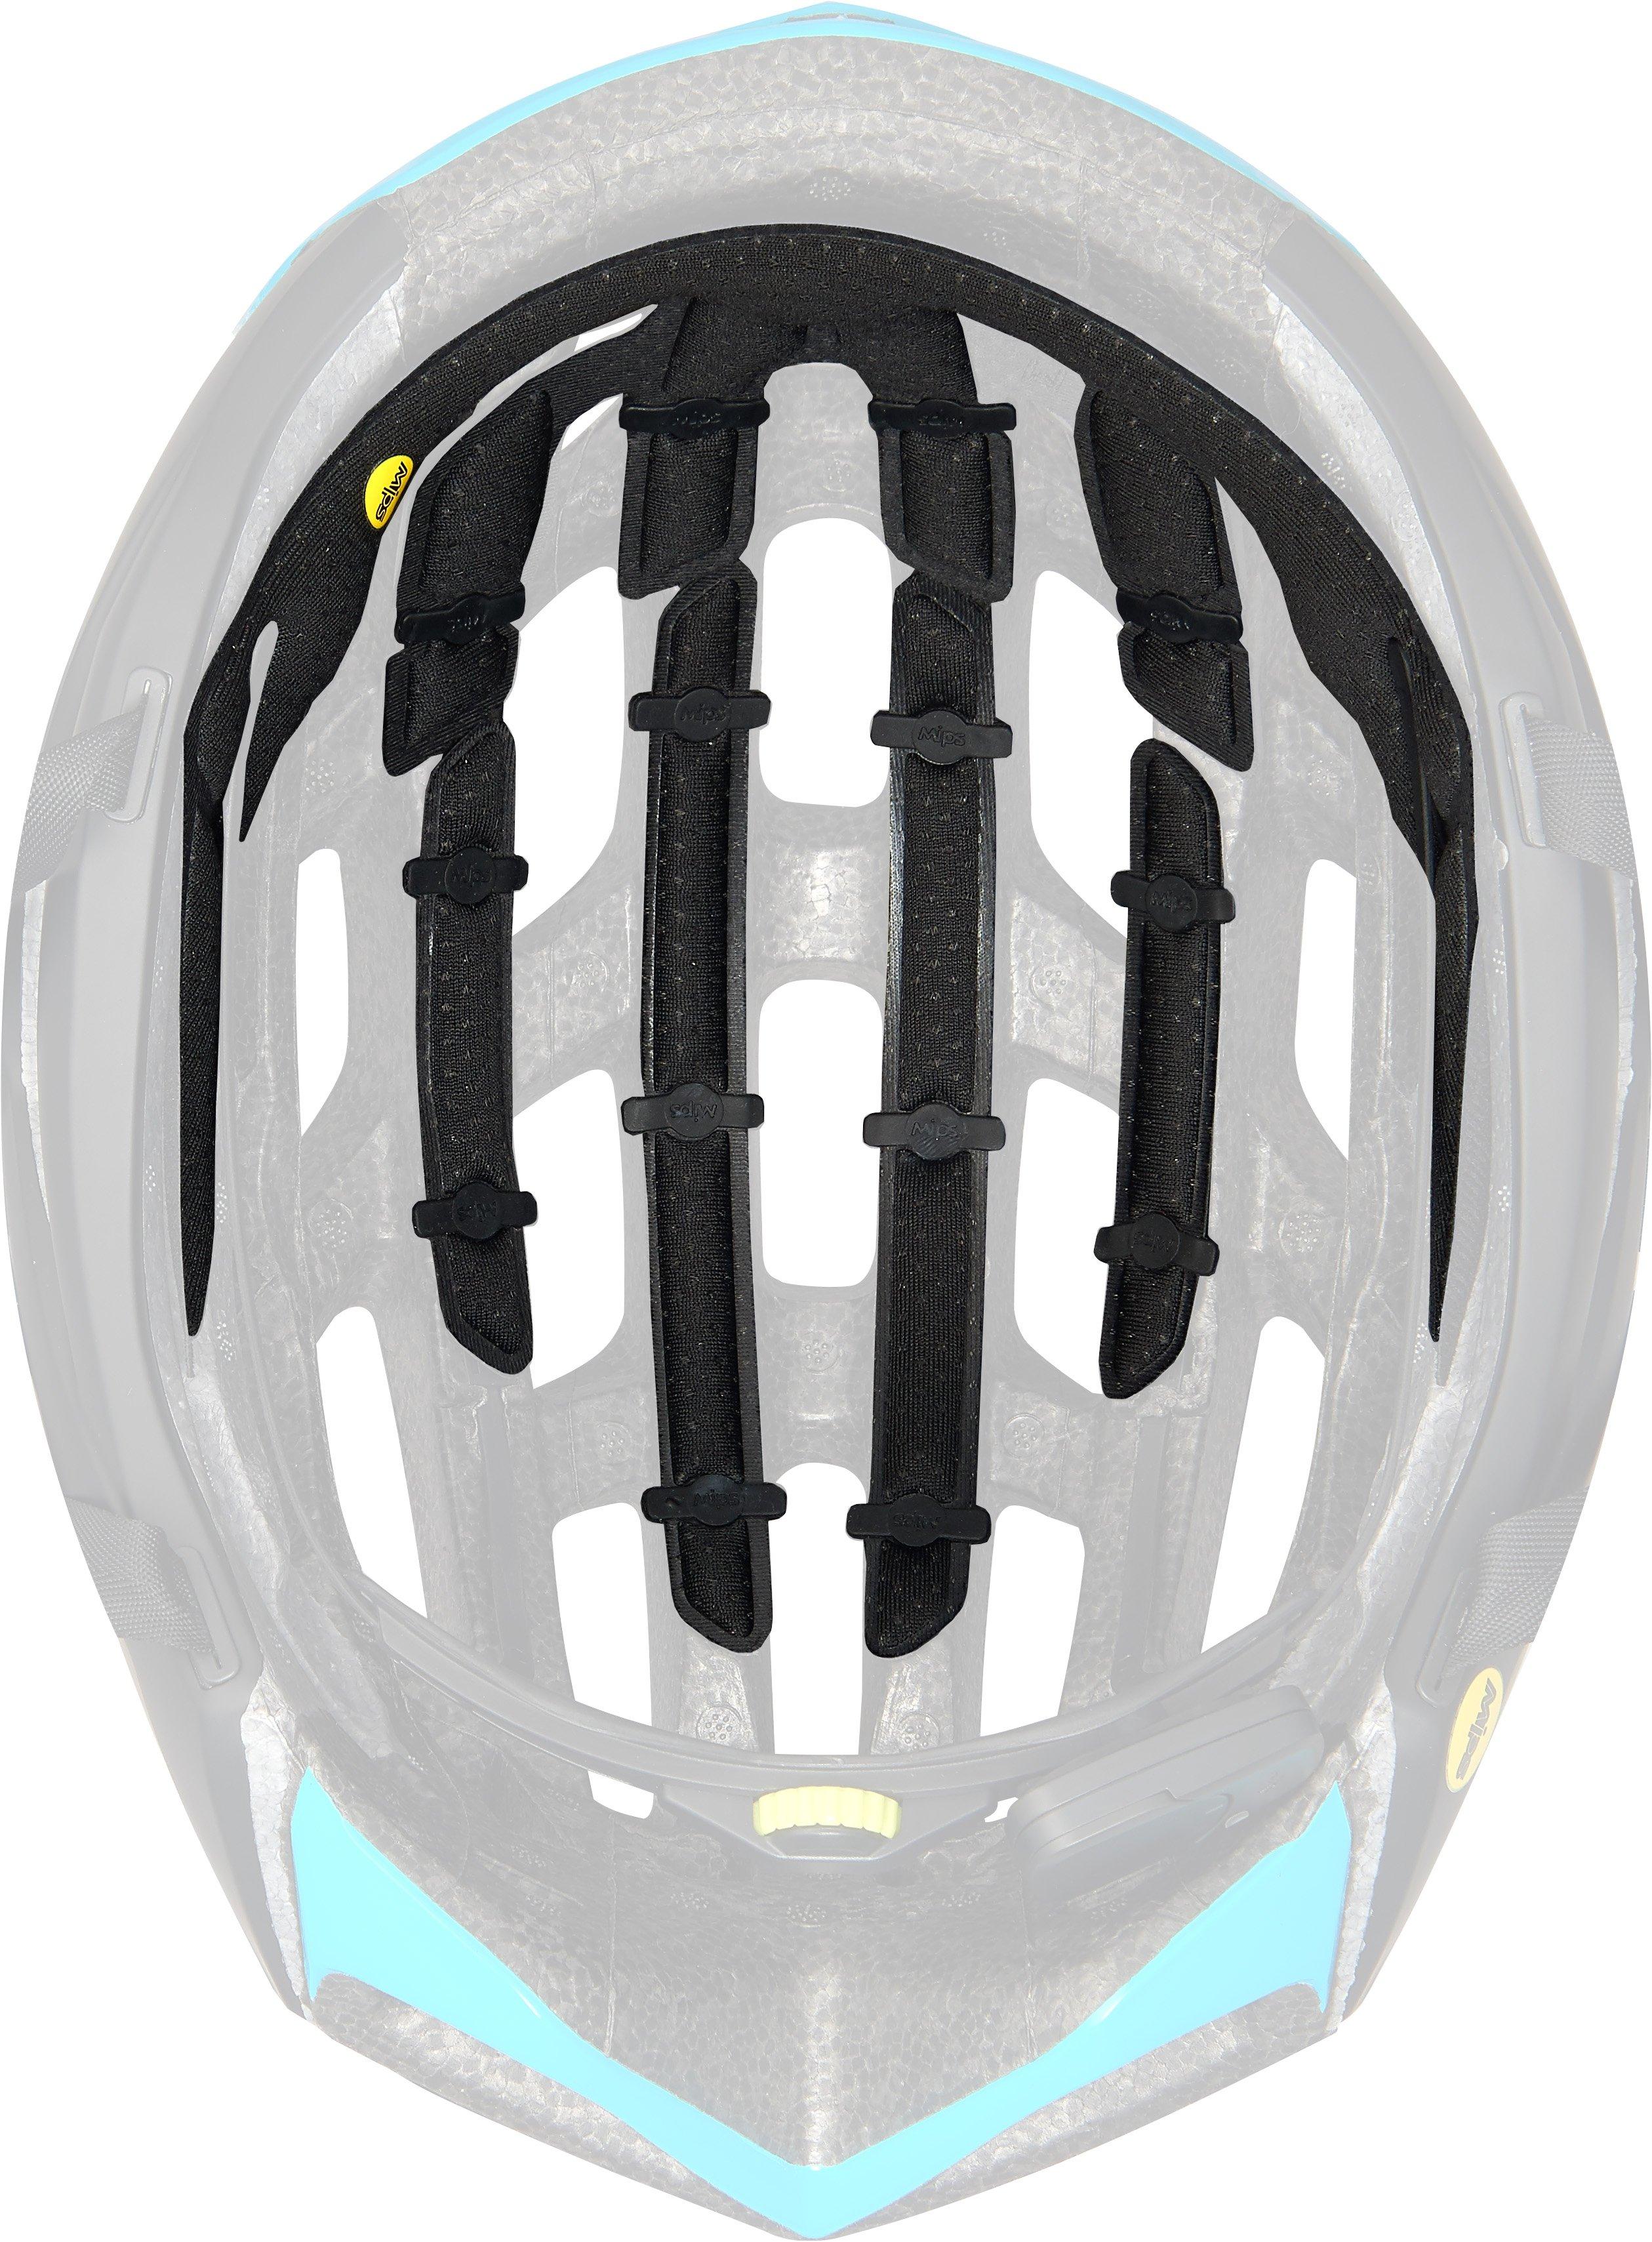 Specialized Prevail II MIPS Padset for Helmet